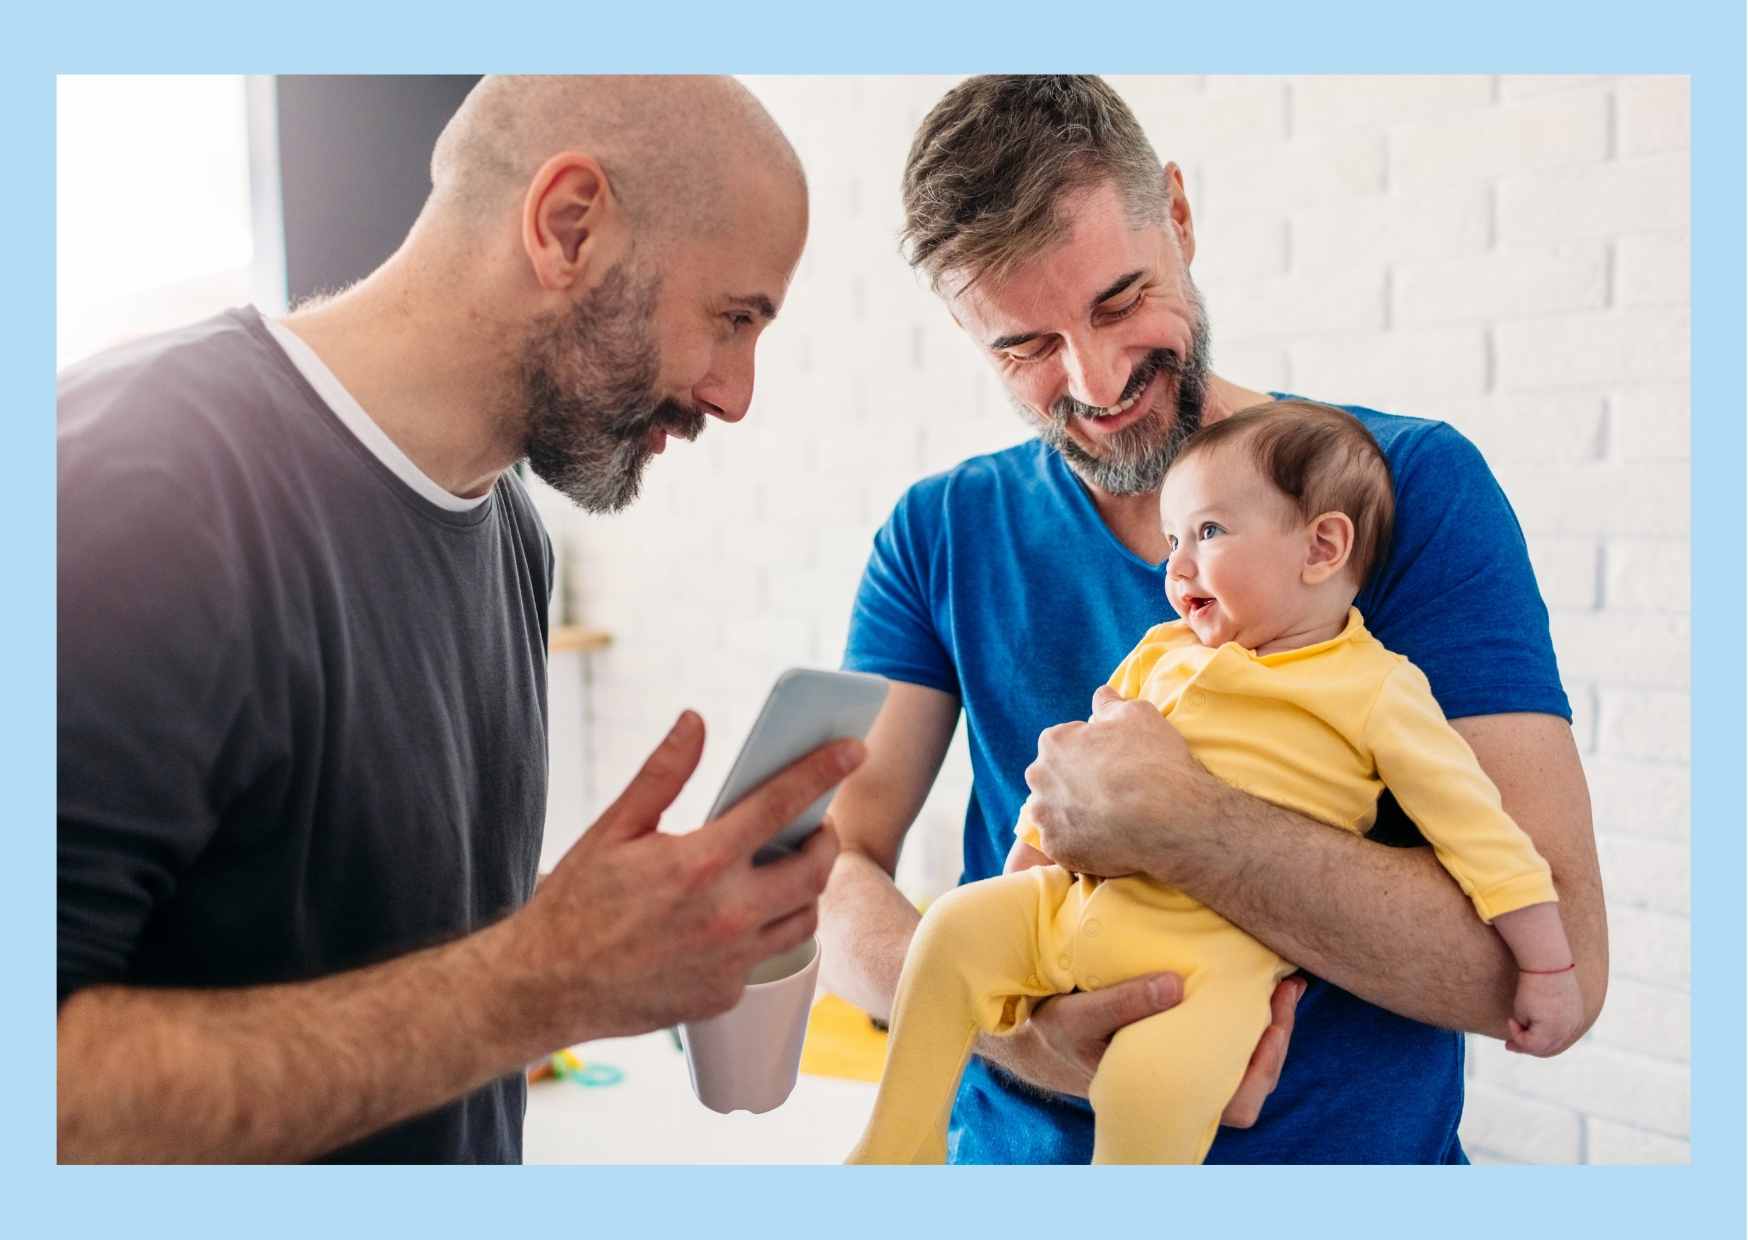 Two smiling men with a smiling baby.